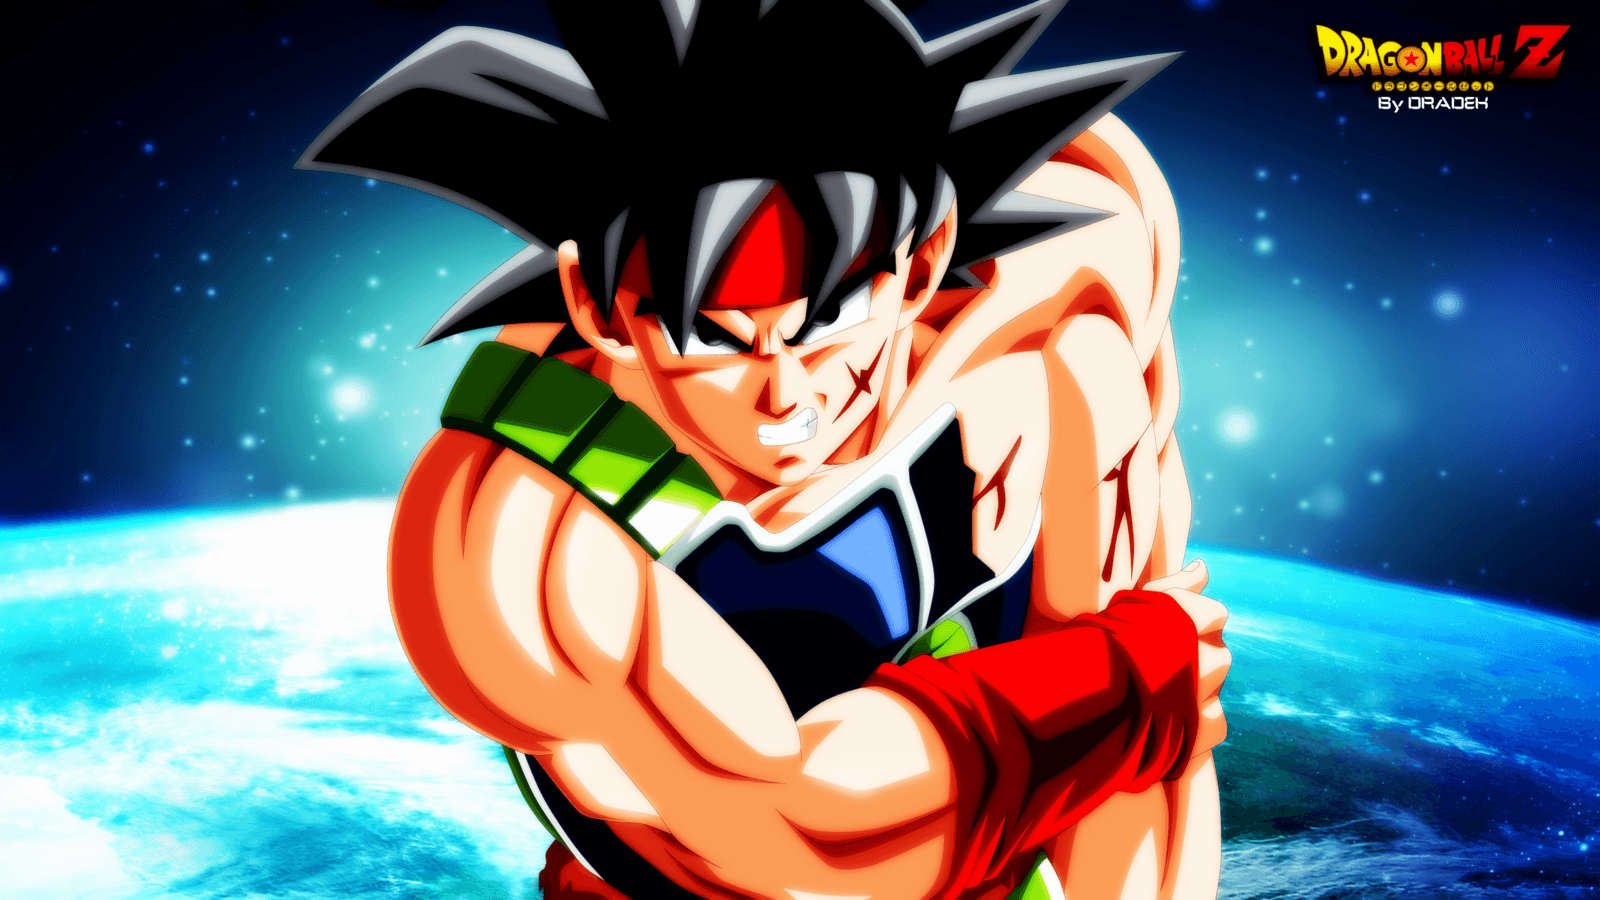 Bardock Wallpapers and Backgrounds Image.